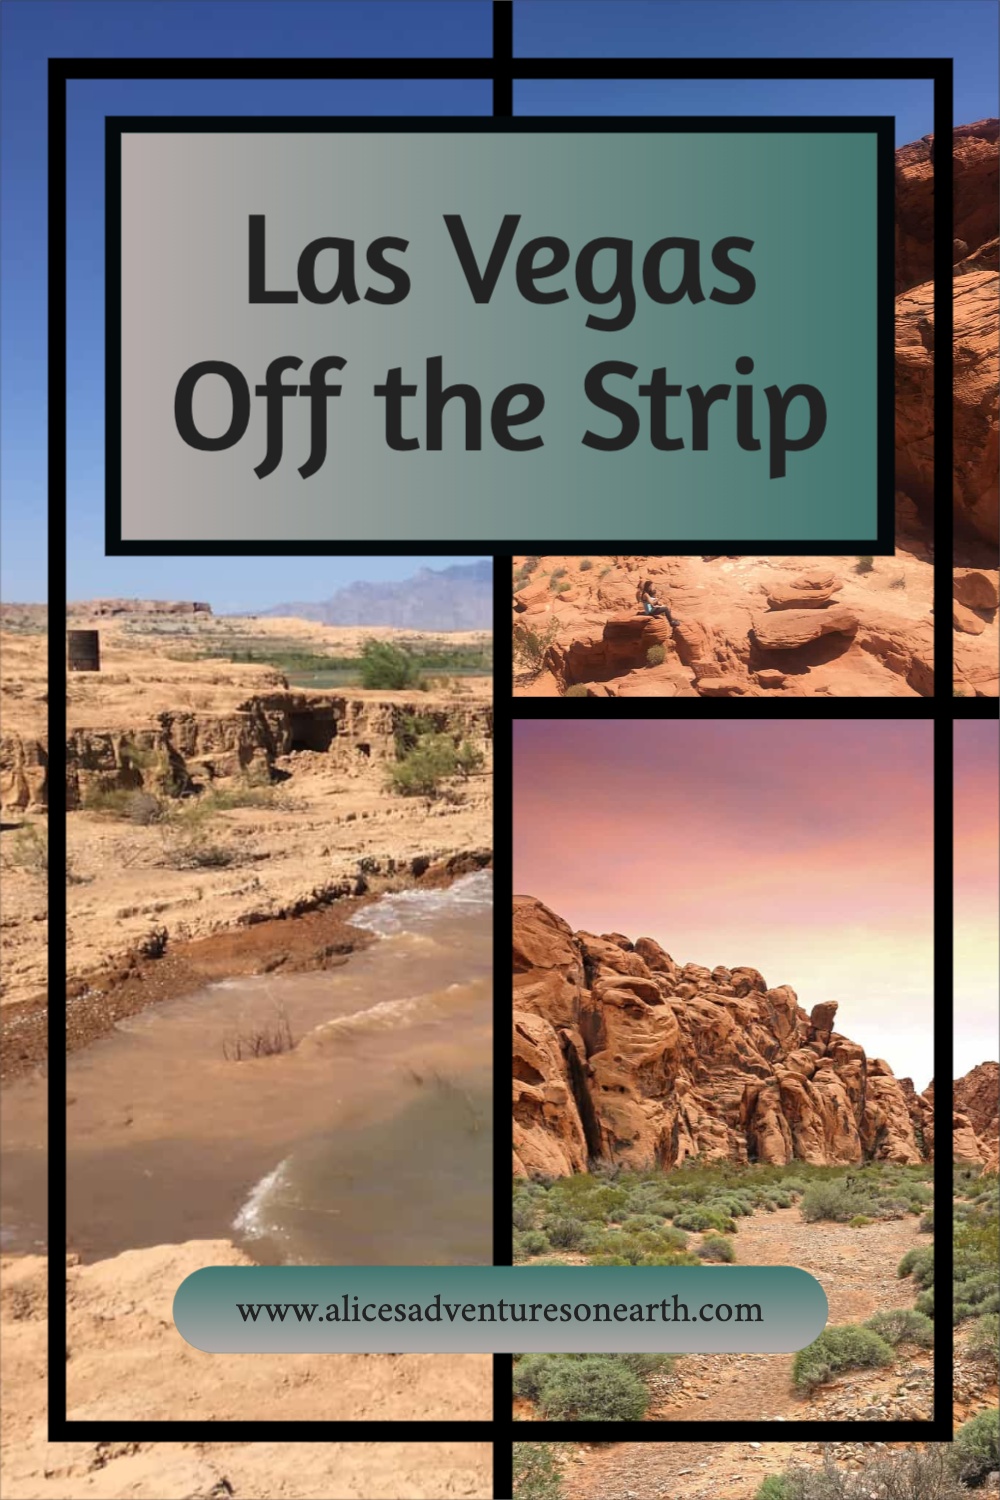 Places to hike, swim and explore off the las vegas strip. There is so much more to discover in Nevada #travellasvegas #lasvegas . 